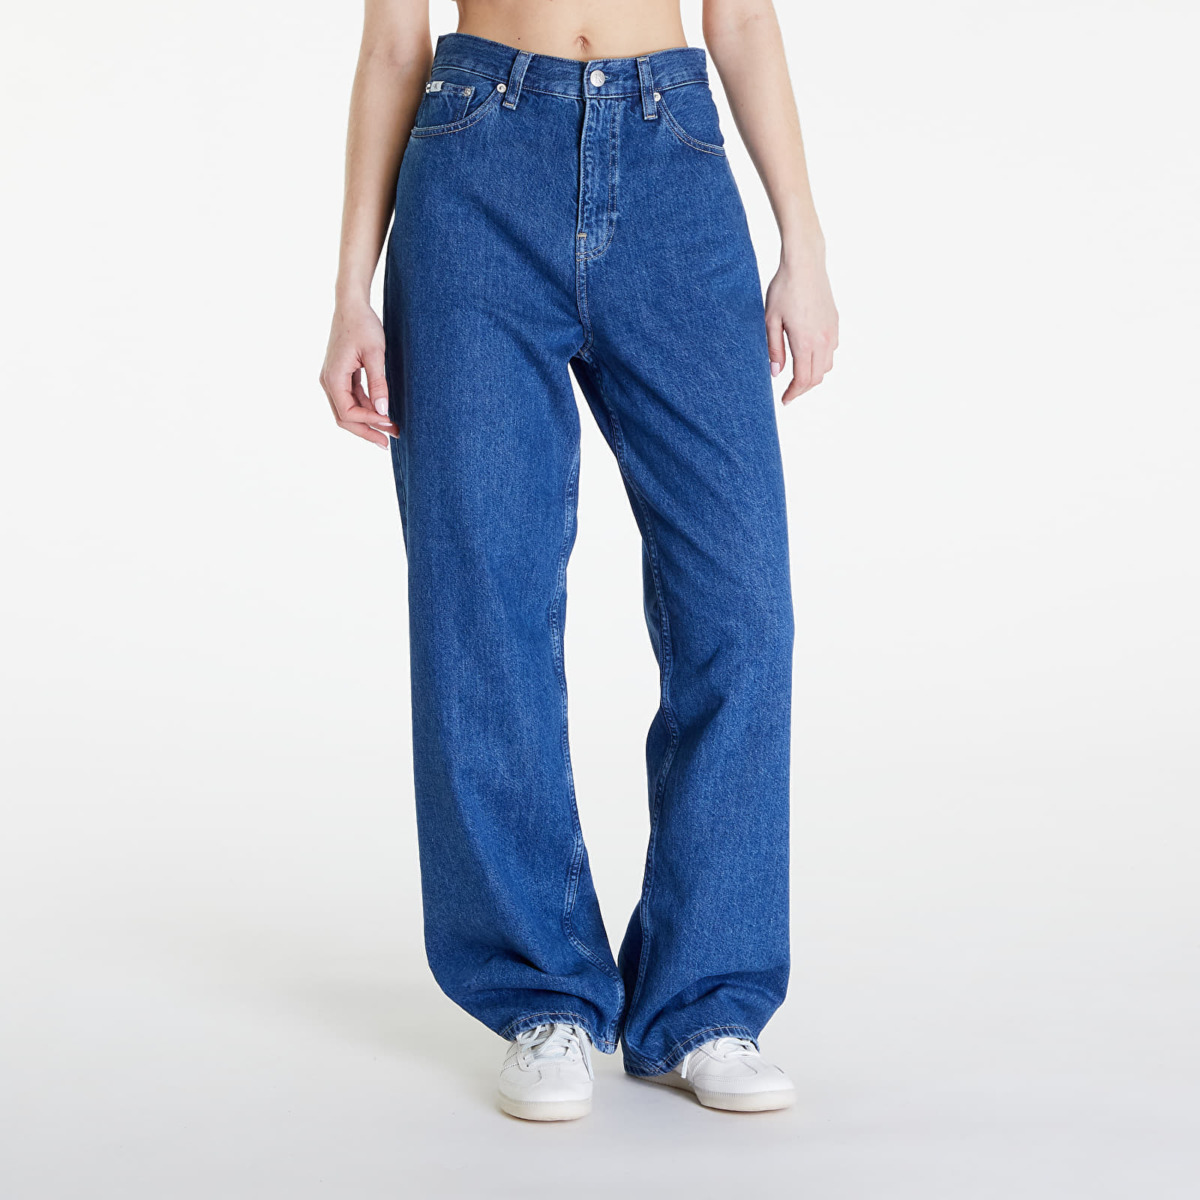 Women's Relaxed Jeans in Blue from Footshop GOOFASH